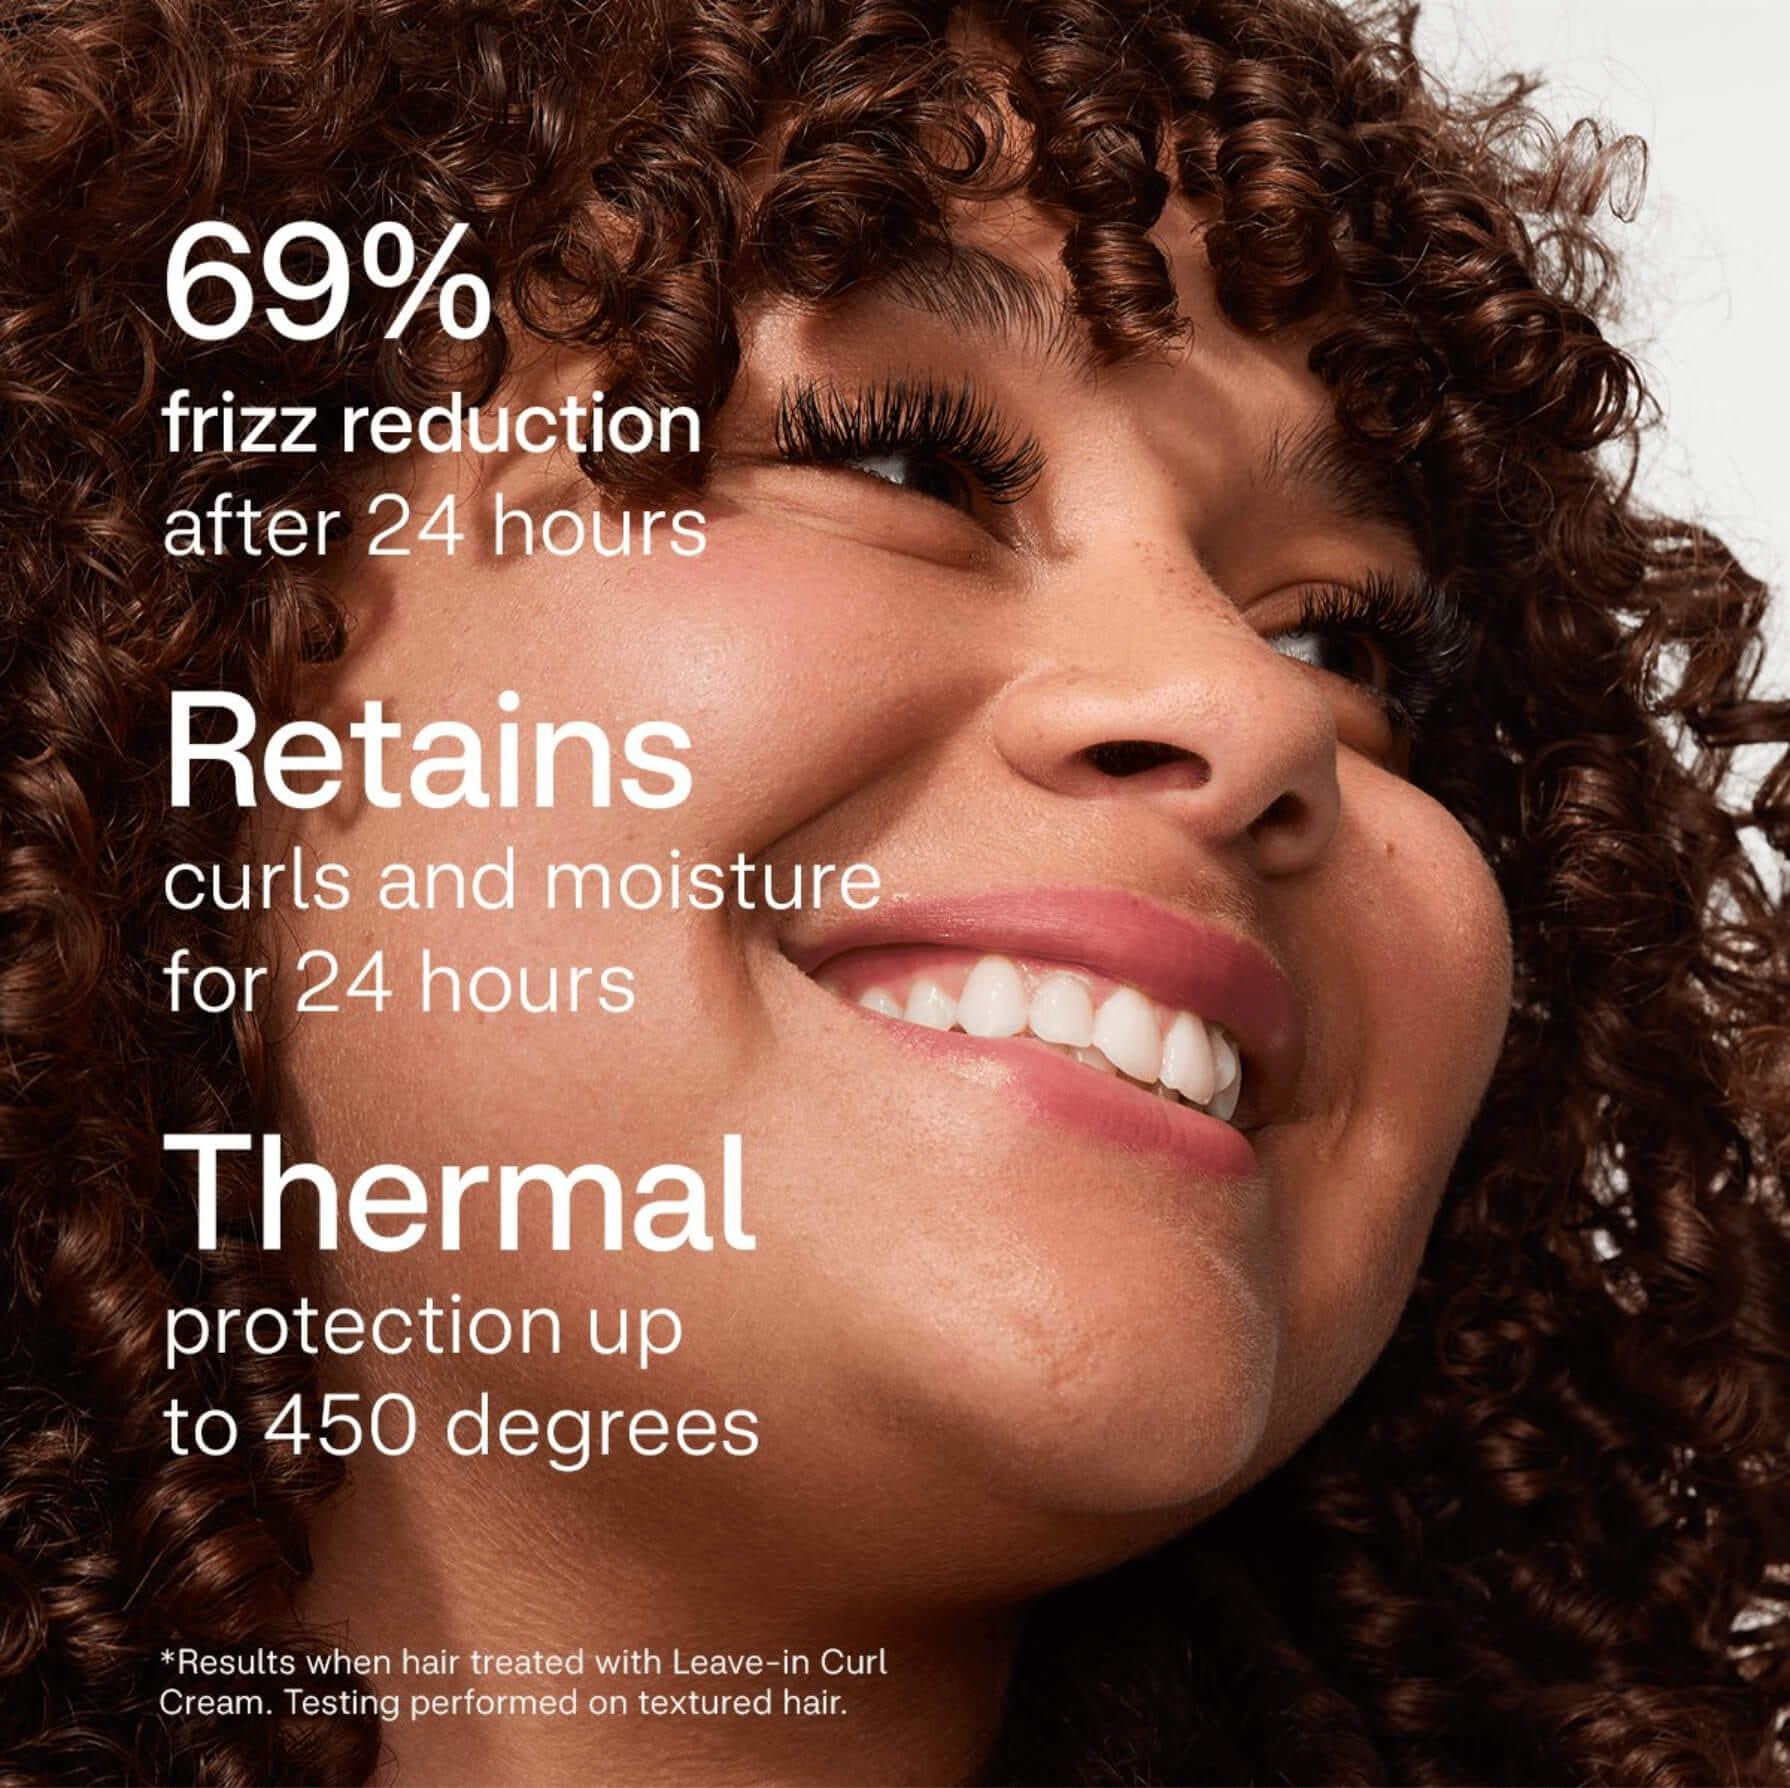 69% friss reduction after 24 hours, retains curls and moisture for 24 hours. Thermal protection up to 450 degrees